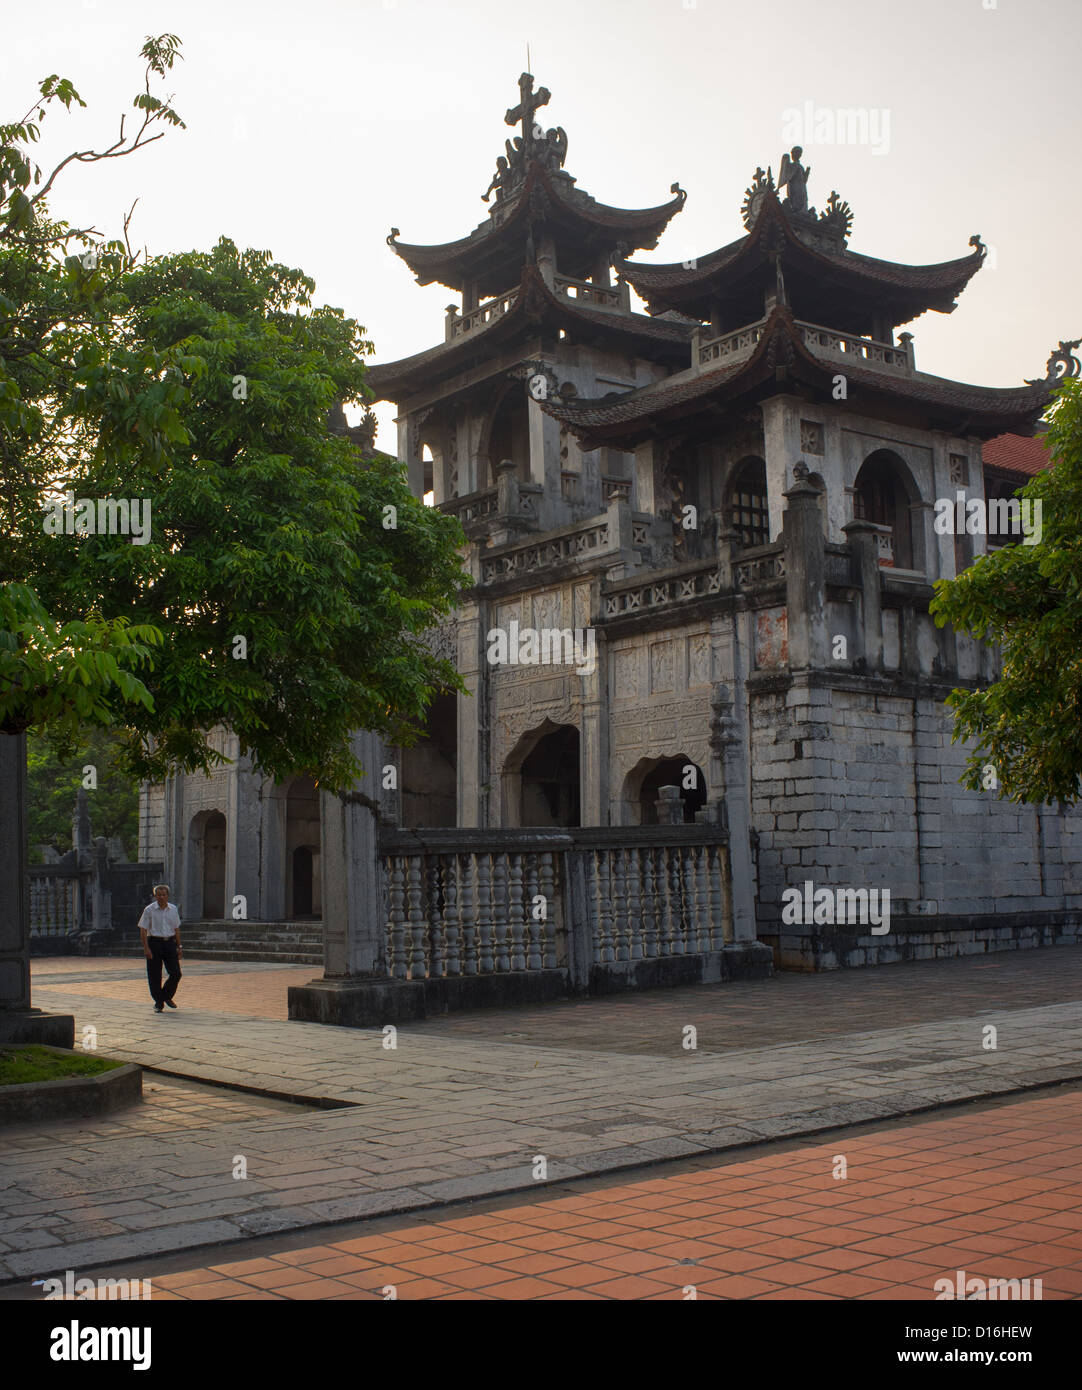 General view pictures of Phat Diem Catholic church complex situated 26KM from Ninh Binh, also known as Kim Son Stock Photo